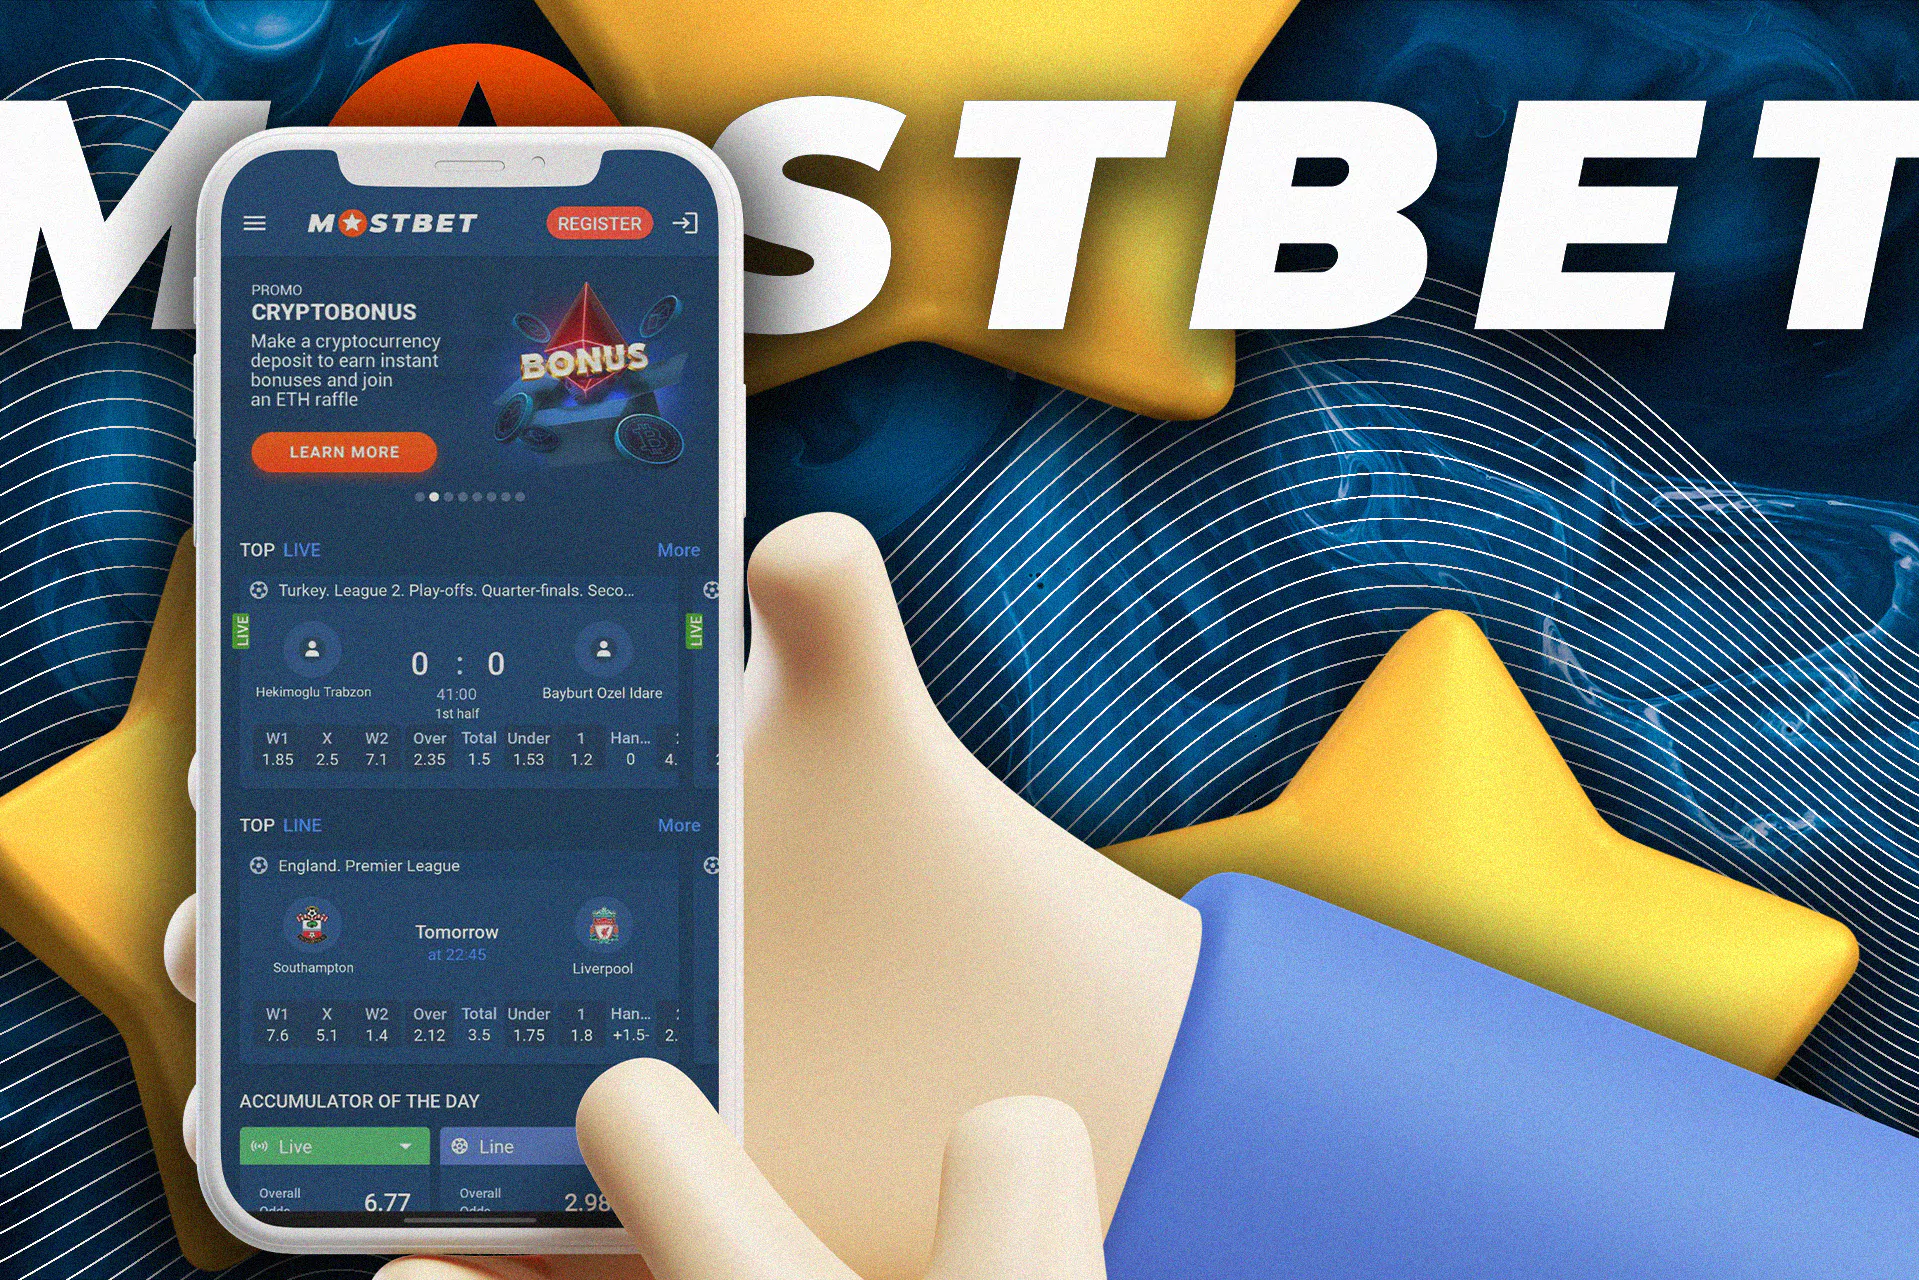 Cash For Mostbet Betting Company and Casino in Egypt